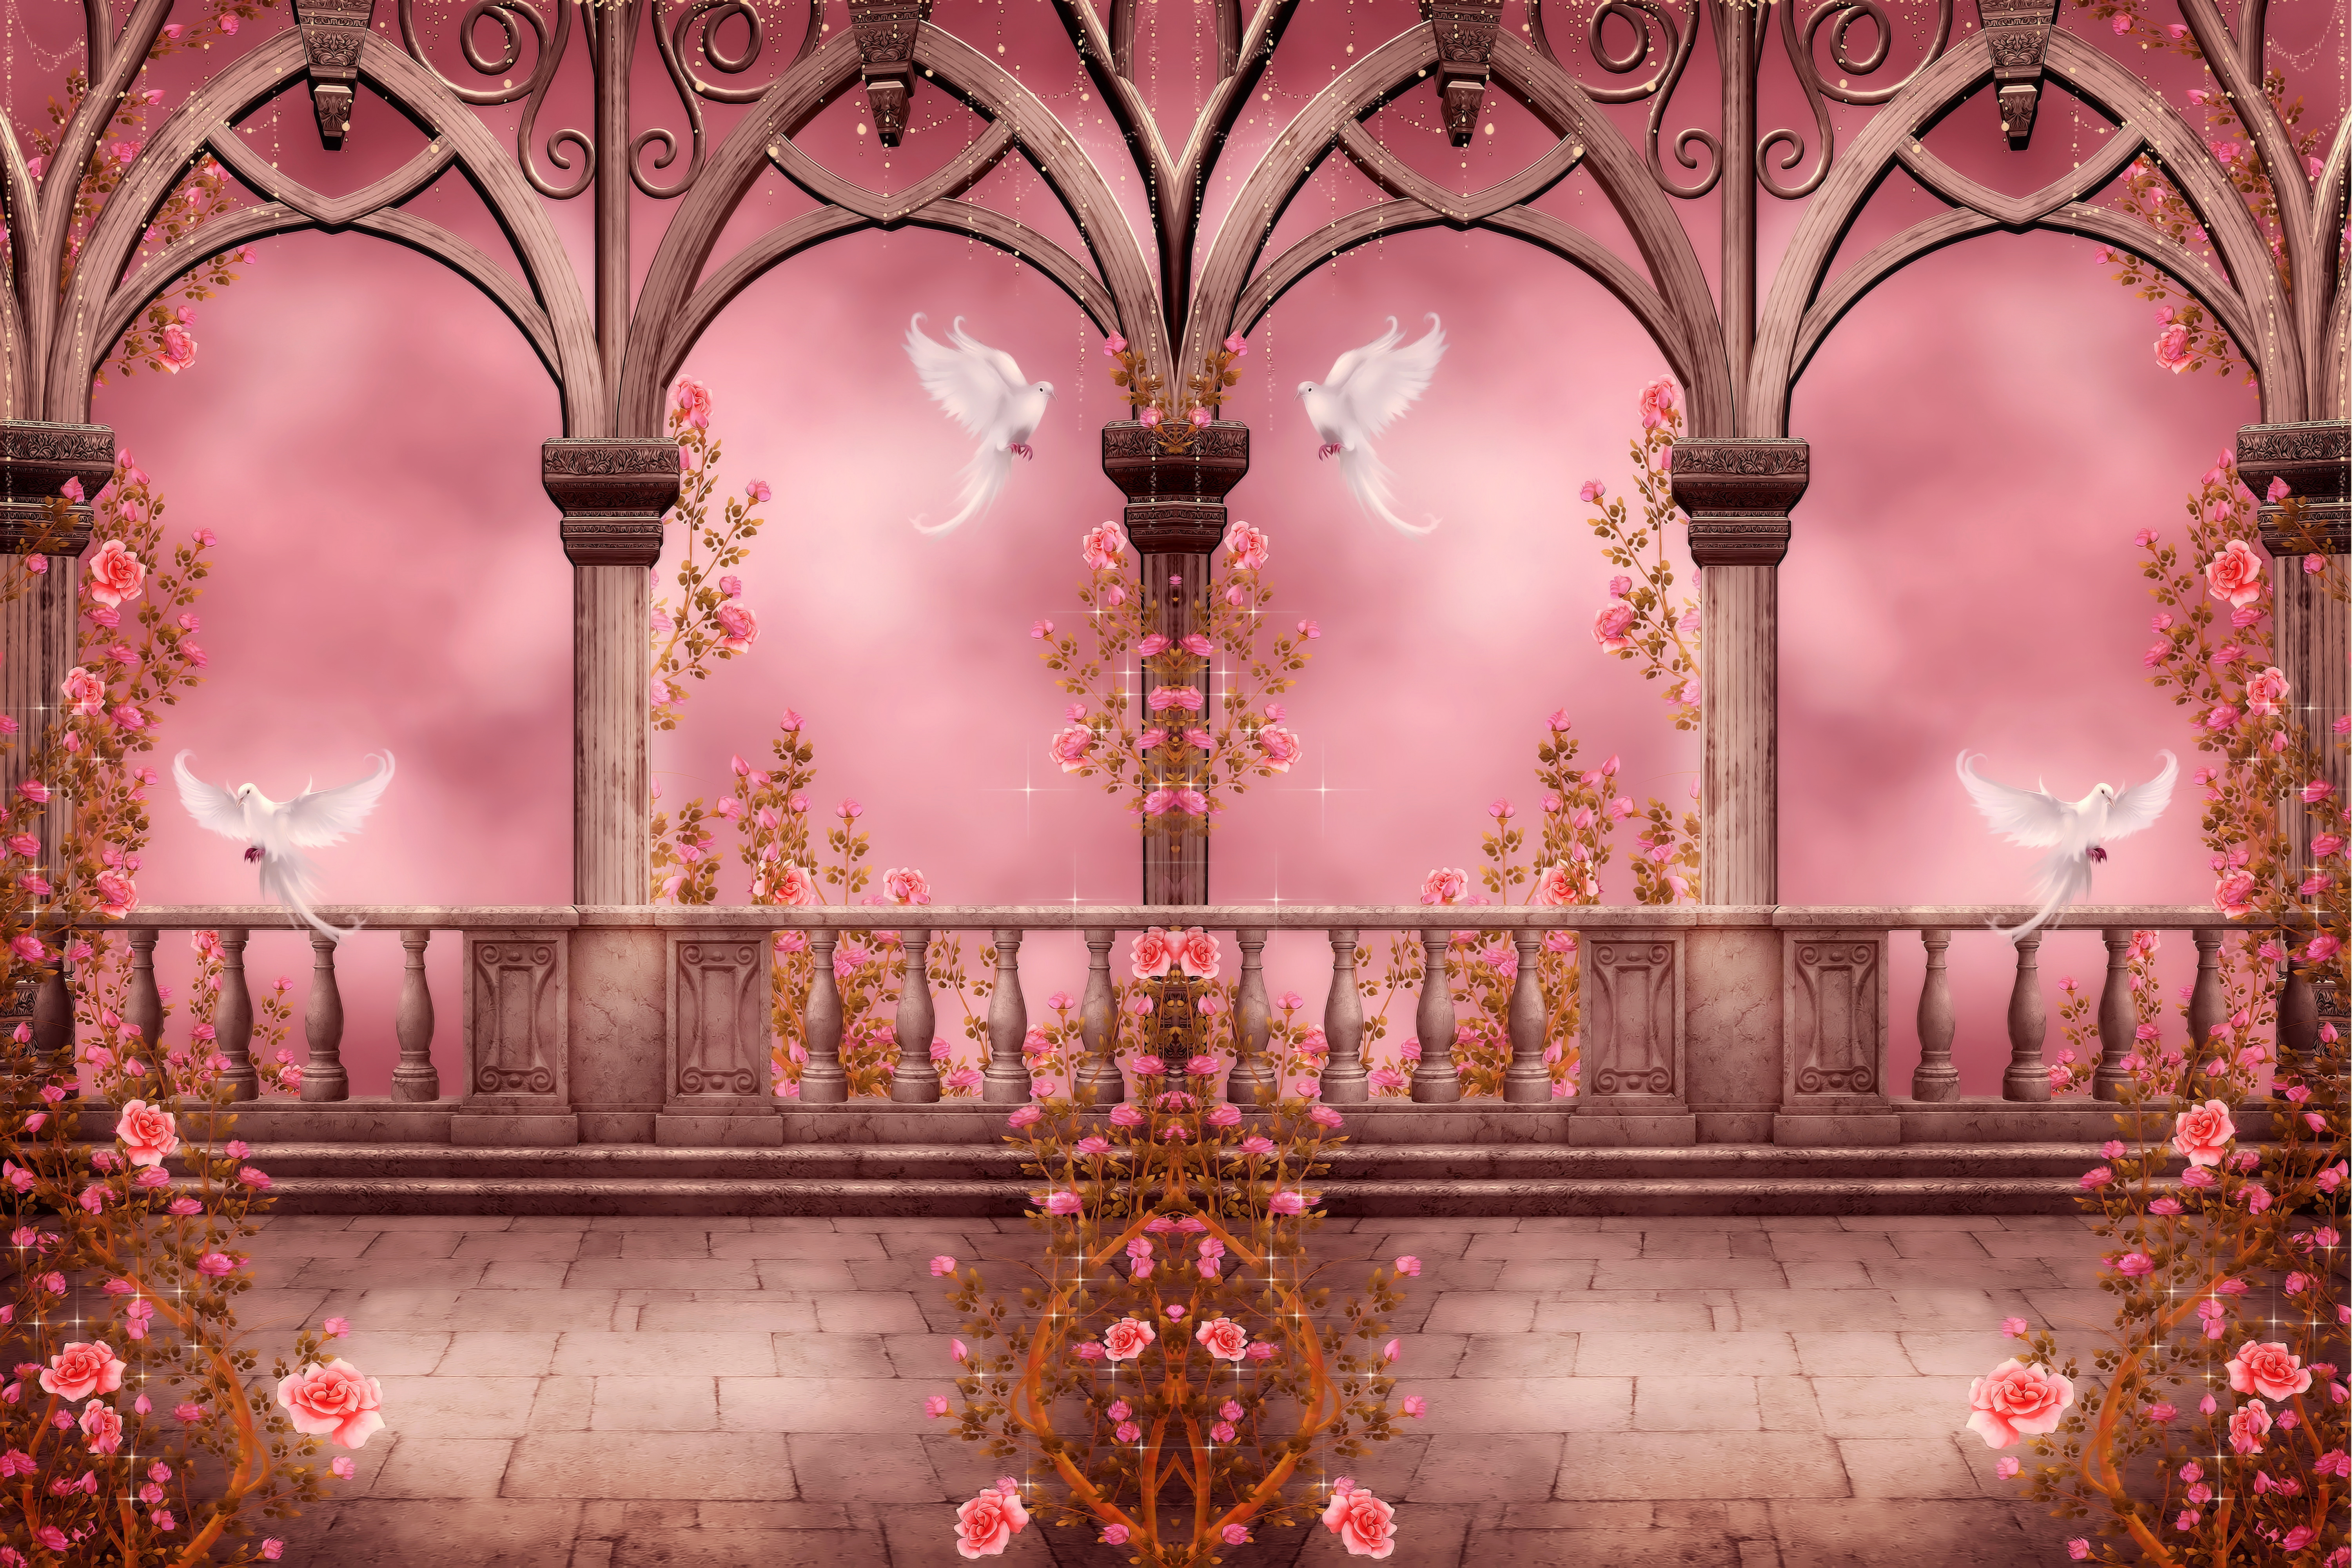 rose, pink, pink rose, artistic, arch, columns, dove, fantasy, gothic